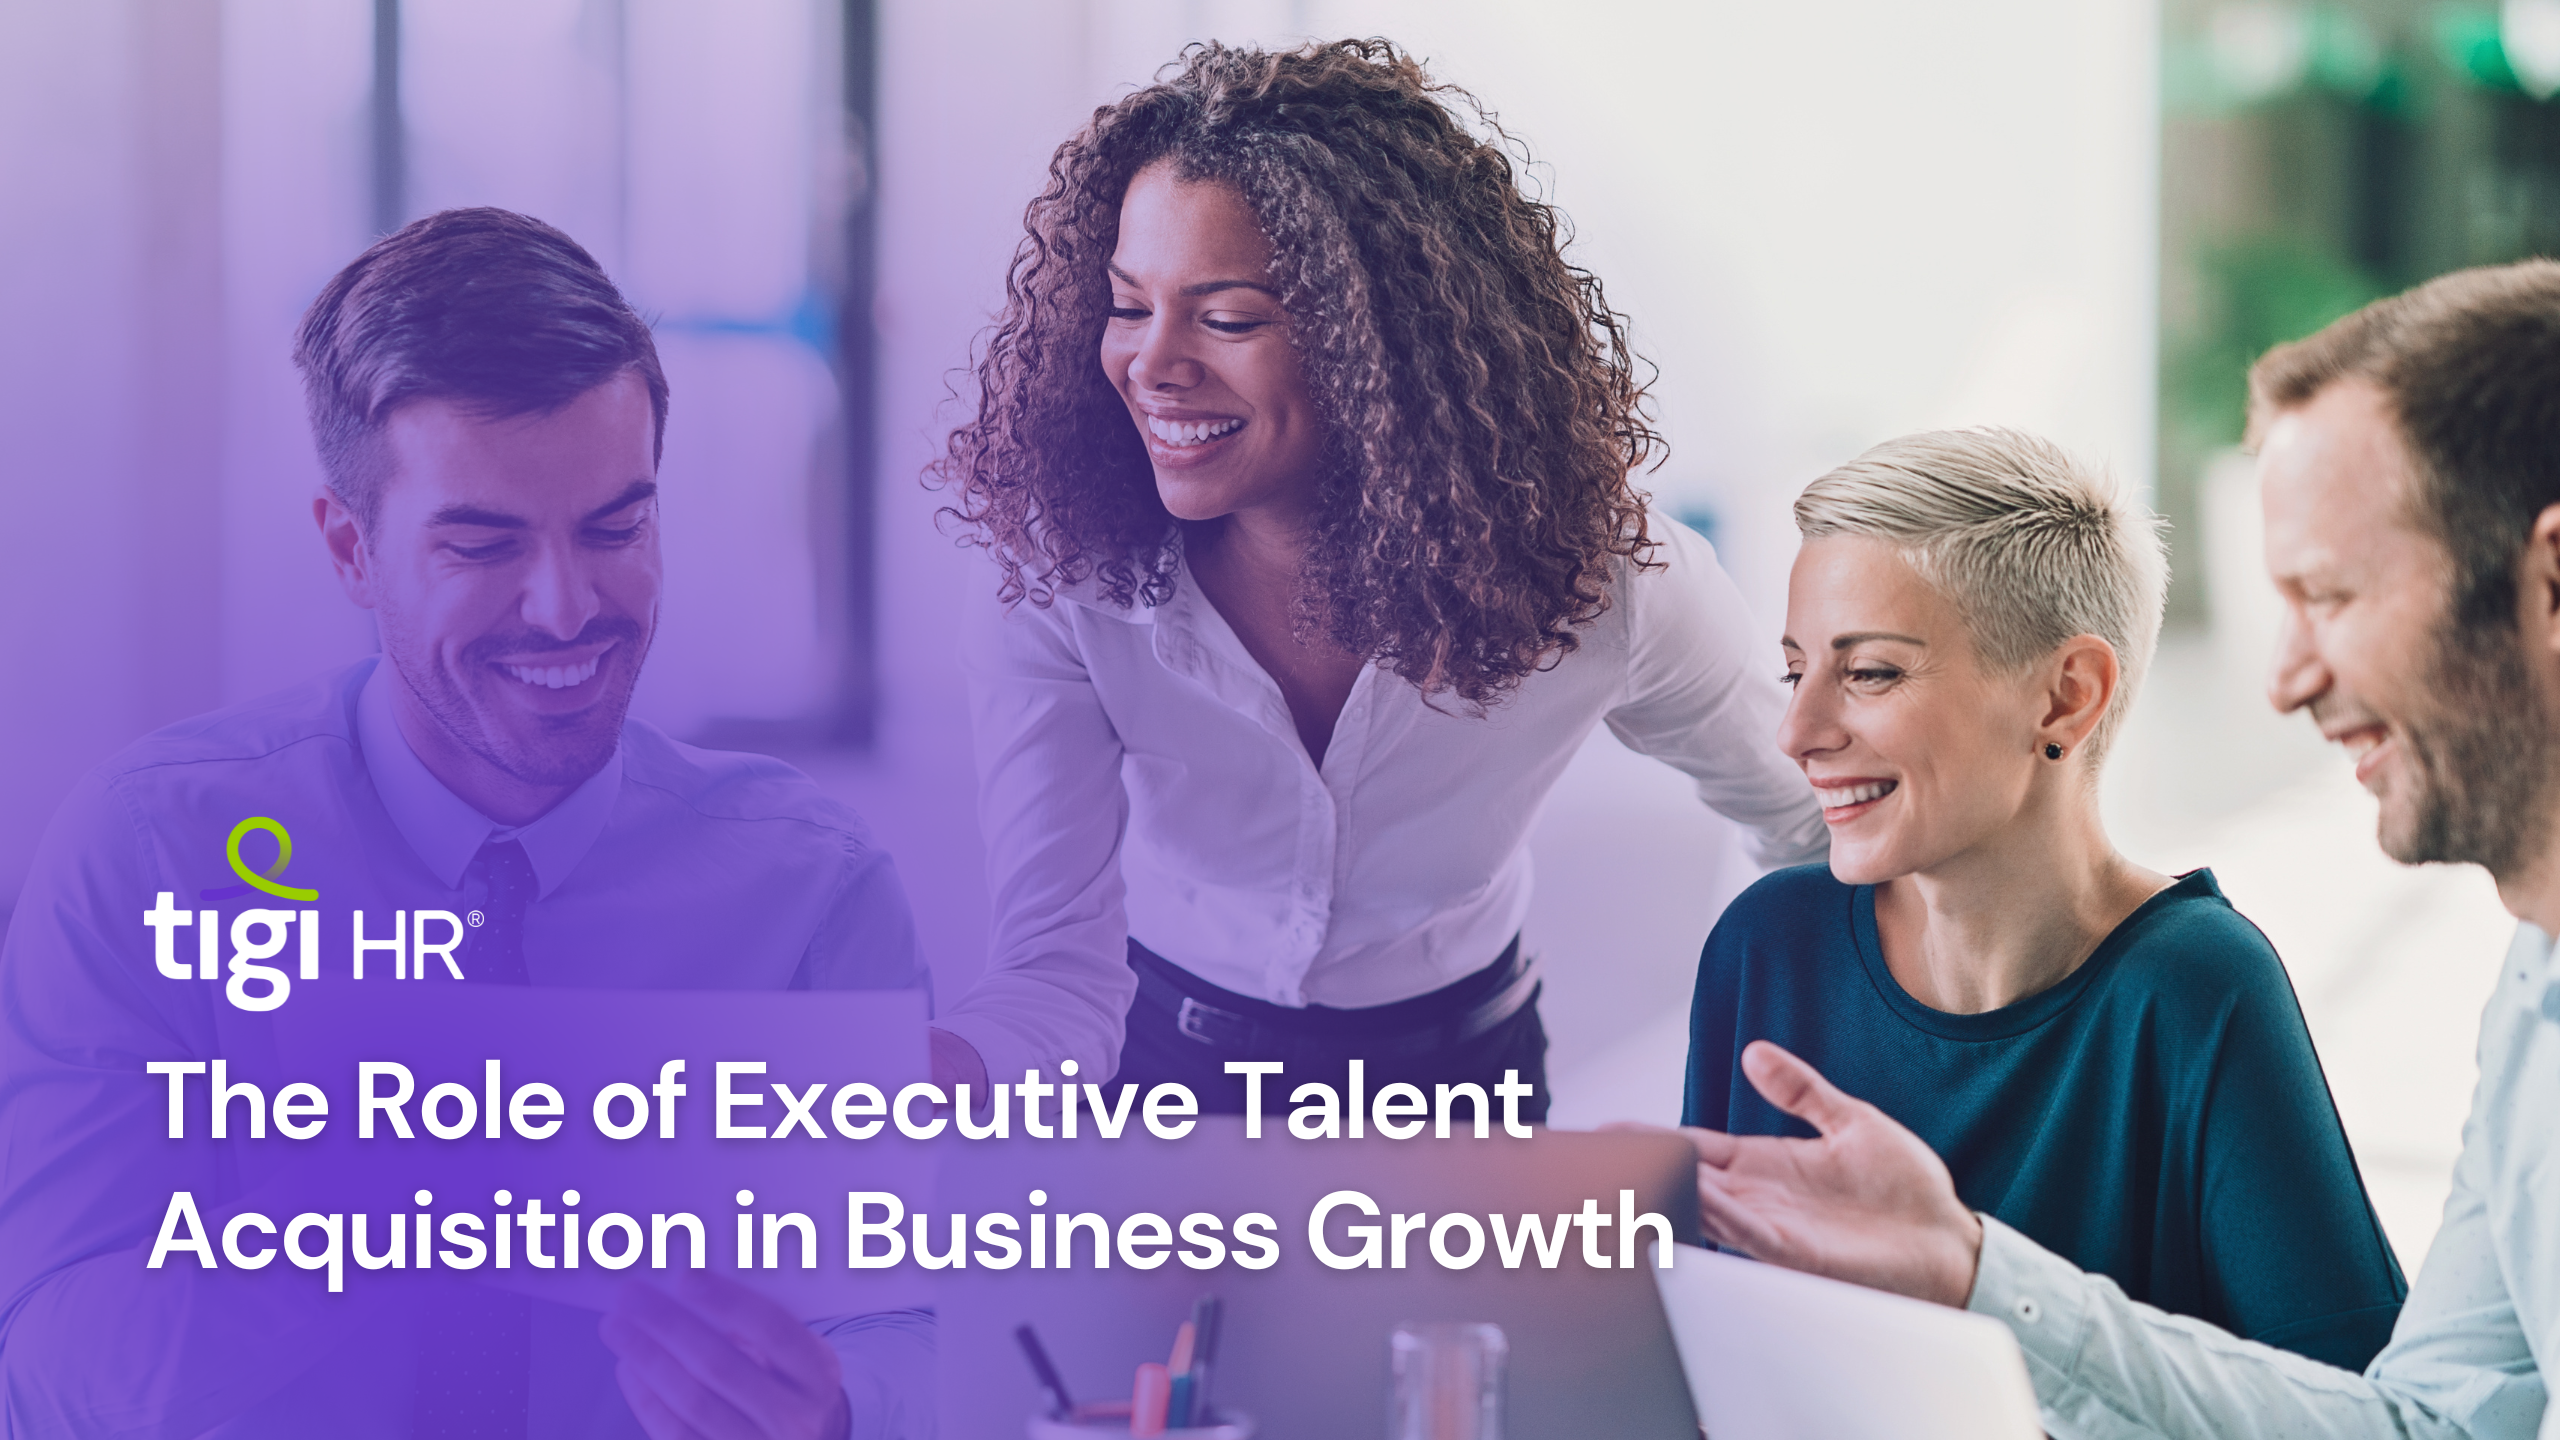 The Role of Executive Talent Acquisition in Business Growth. Find jobs at TIGI HR.